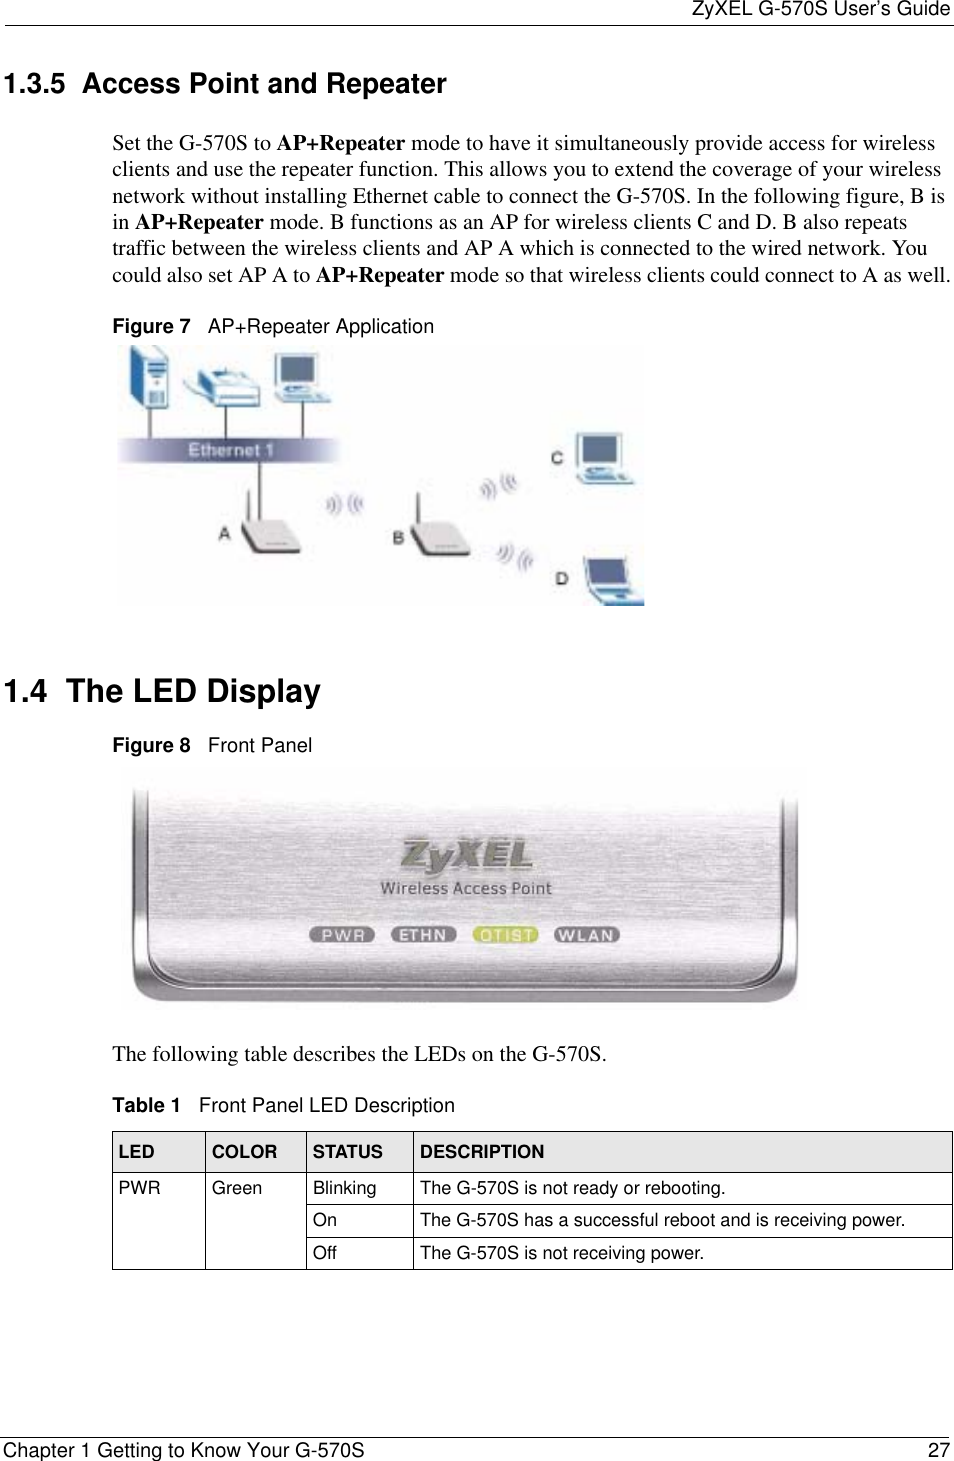 ZyXEL G-570S User’s GuideChapter 1 Getting to Know Your G-570S 271.3.5  Access Point and RepeaterSet the G-570S to AP+Repeater mode to have it simultaneously provide access for wireless clients and use the repeater function. This allows you to extend the coverage of your wireless network without installing Ethernet cable to connect the G-570S. In the following figure, B is in AP+Repeater mode. B functions as an AP for wireless clients C and D. B also repeats traffic between the wireless clients and AP A which is connected to the wired network. You could also set AP A to AP+Repeater mode so that wireless clients could connect to A as well.Figure 7   AP+Repeater Application1.4  The LED DisplayFigure 8   Front PanelThe following table describes the LEDs on the G-570S.Table 1   Front Panel LED DescriptionLED COLOR STATUS DESCRIPTIONPWR Green Blinking The G-570S is not ready or rebooting.On The G-570S has a successful reboot and is receiving power.Off The G-570S is not receiving power.